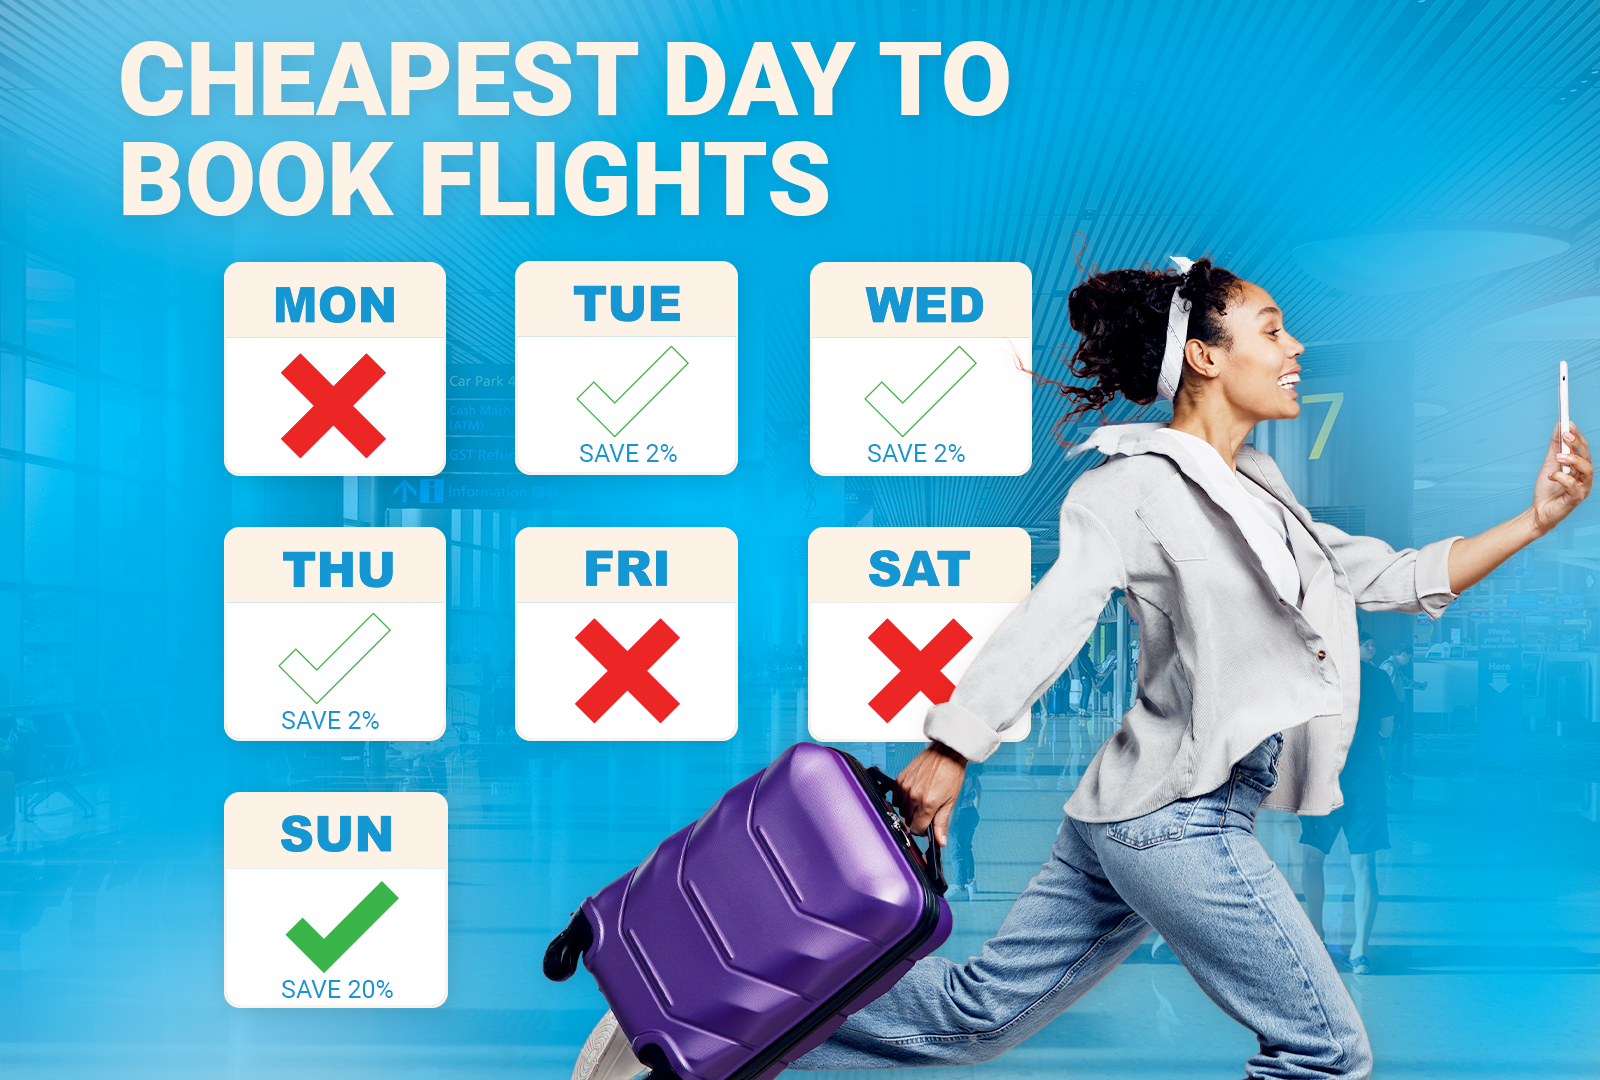 The cheapest days to book flights summary in a graphic with a woman running with a suitcase on a black background